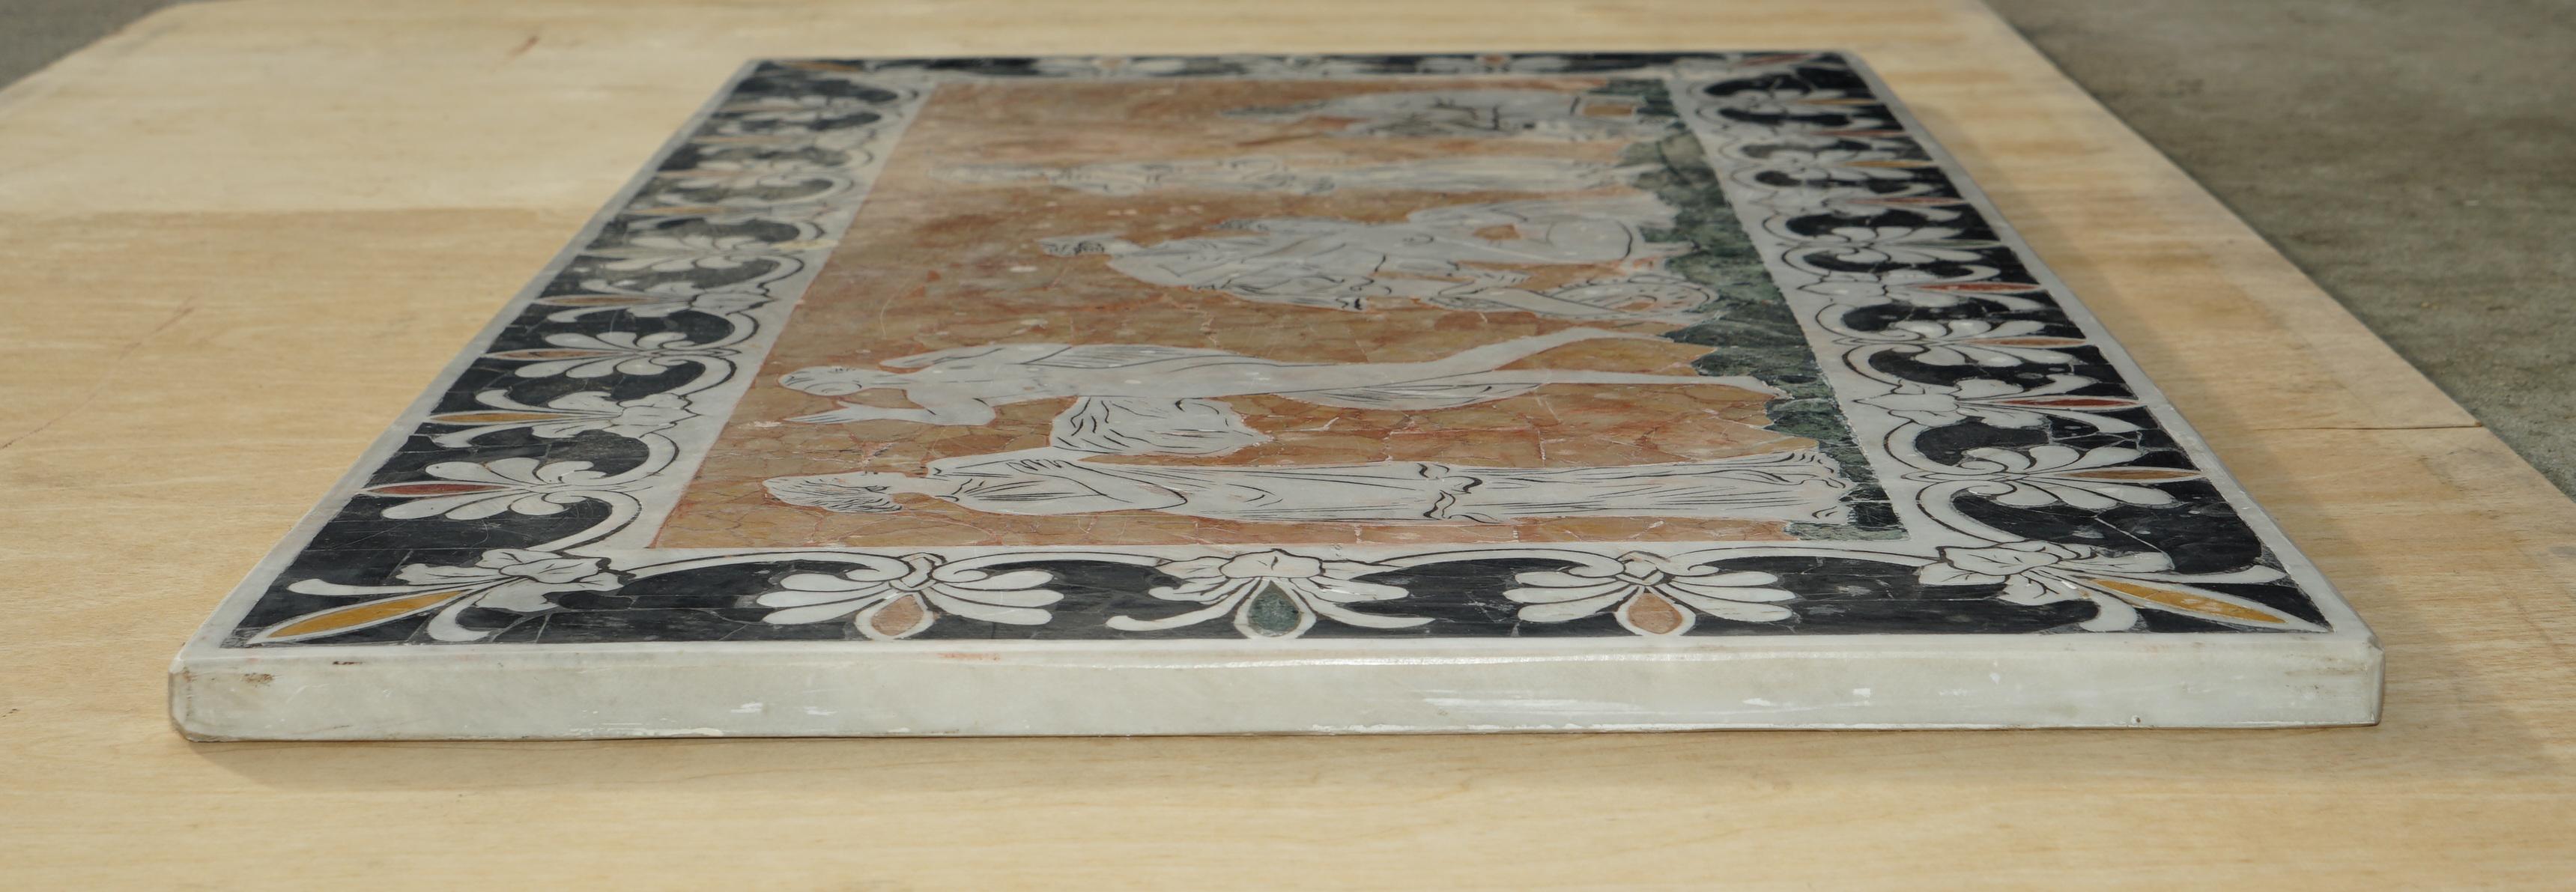 Very Rare Antique Italian circa 1860 Marble Mosaic Neoclassical Panel Table Top For Sale 15